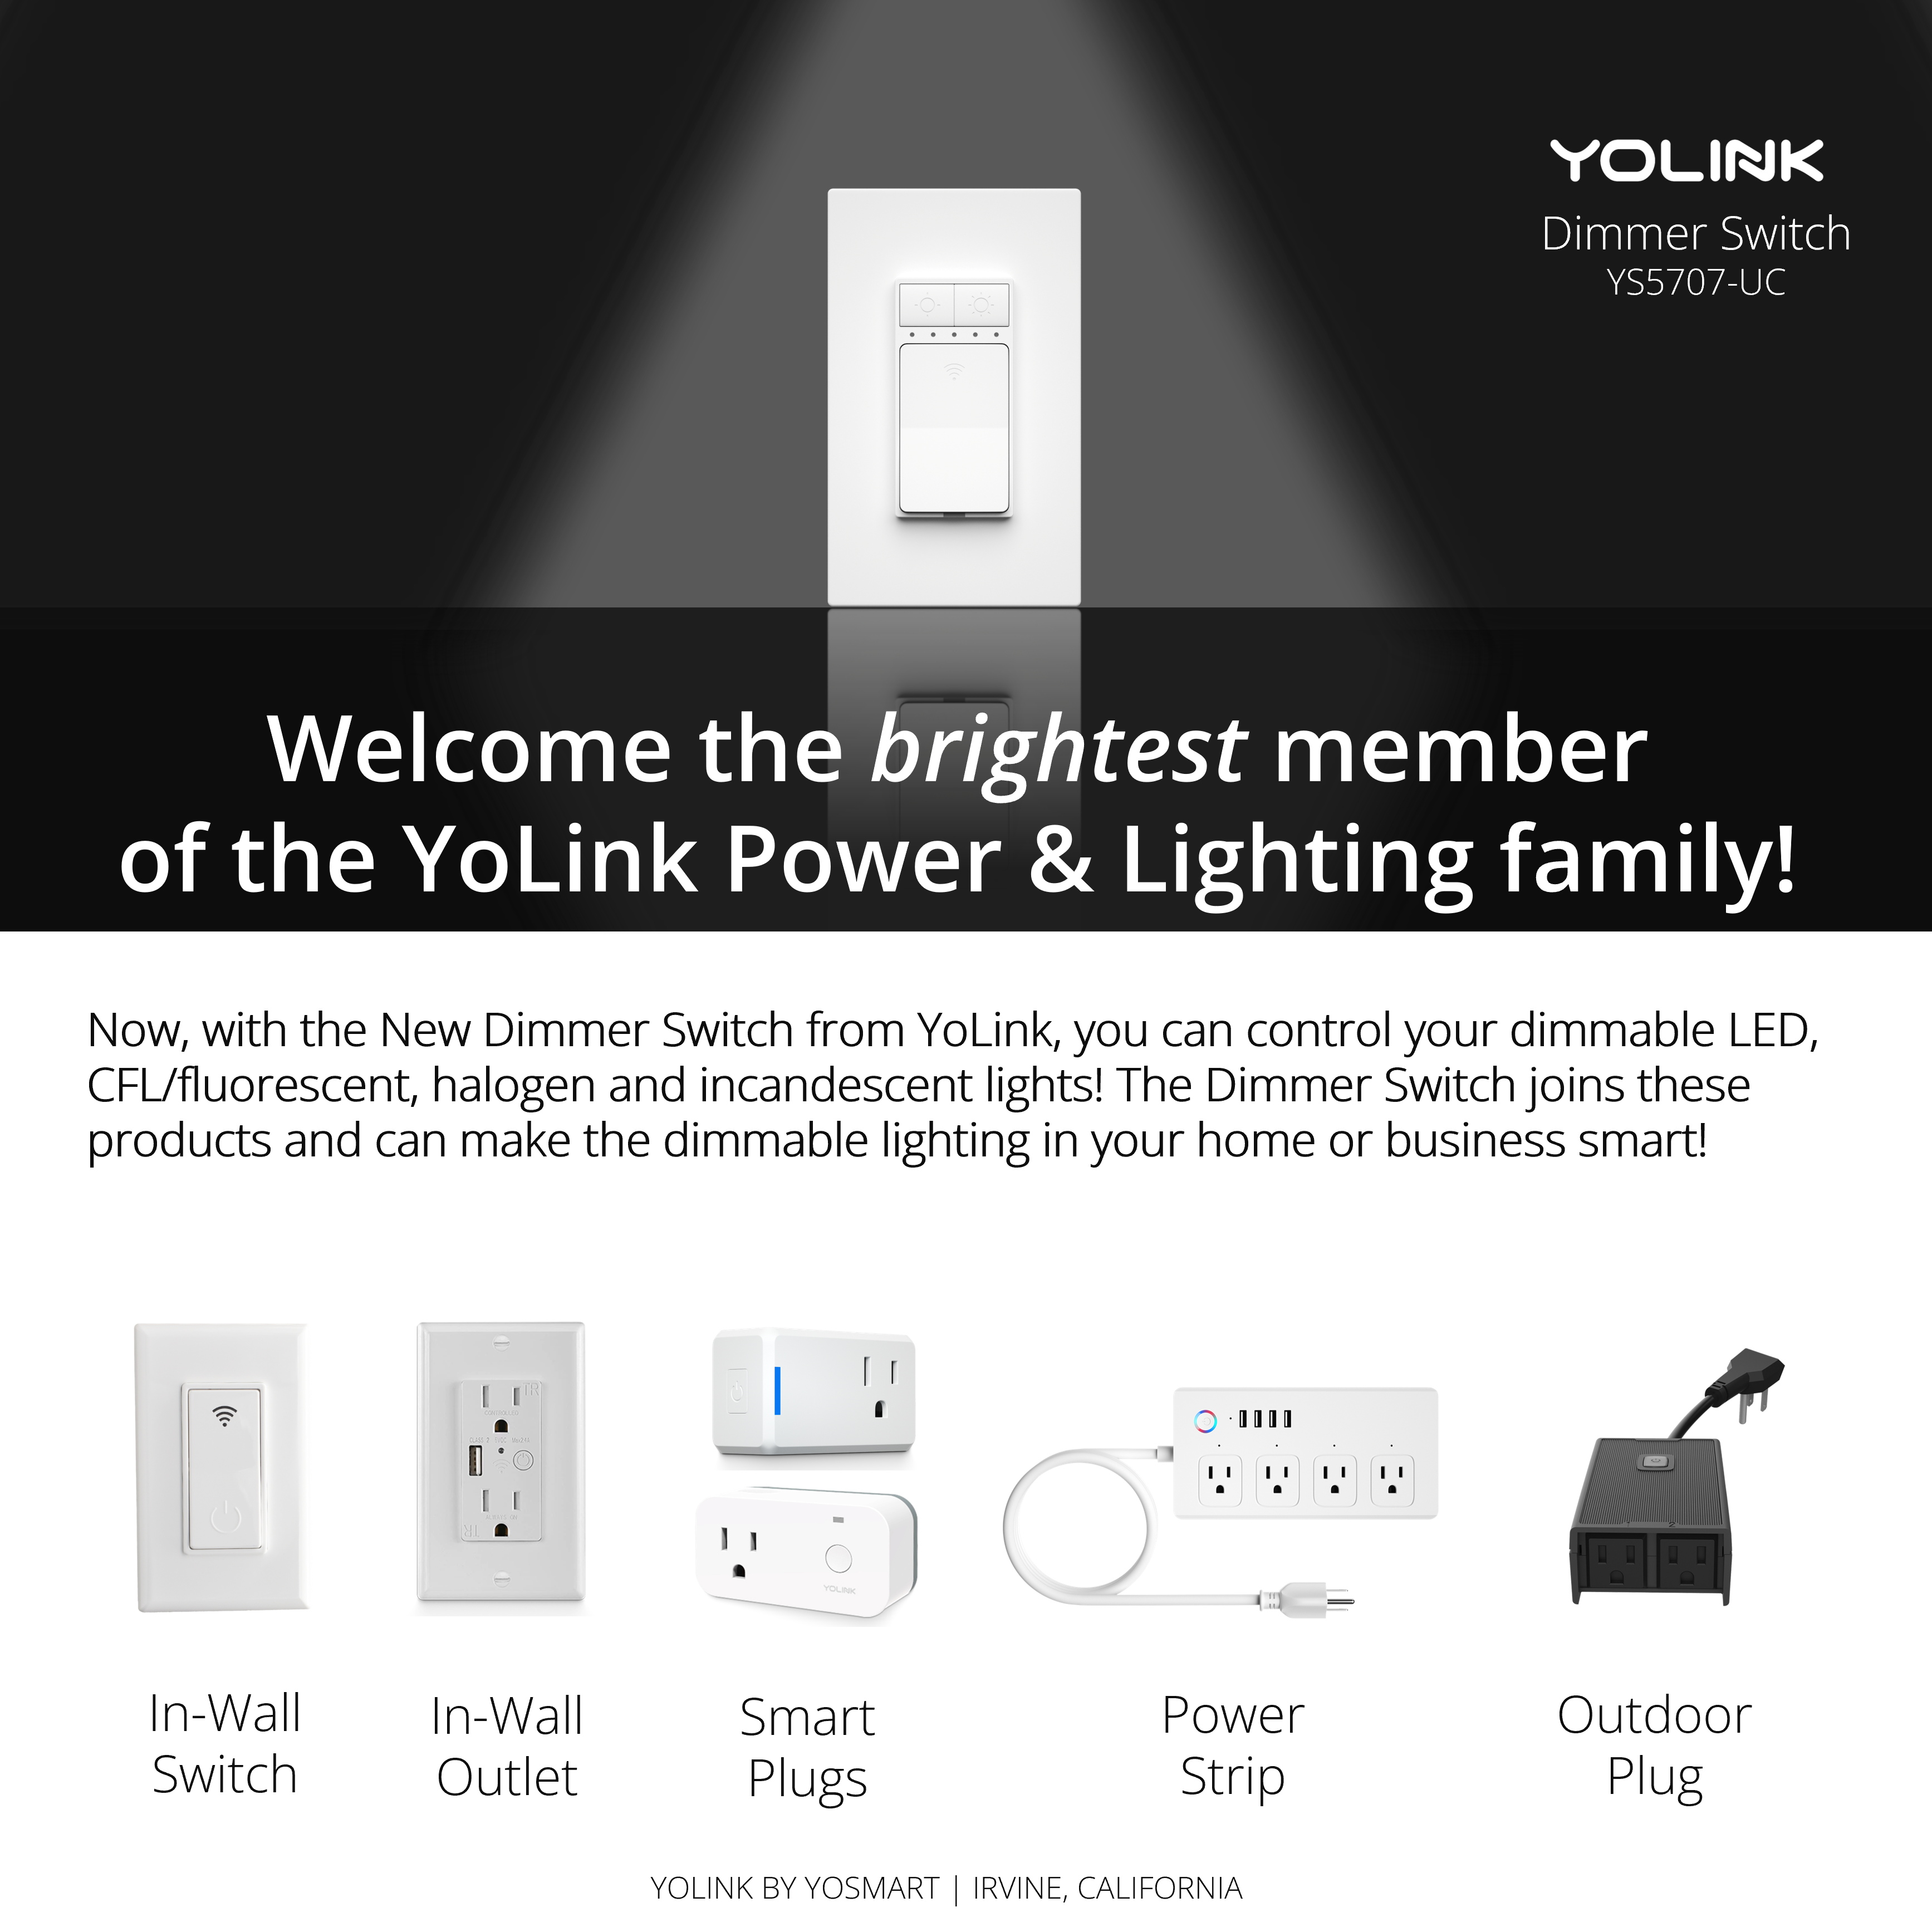 Smart Dimmer Switch from YoLink